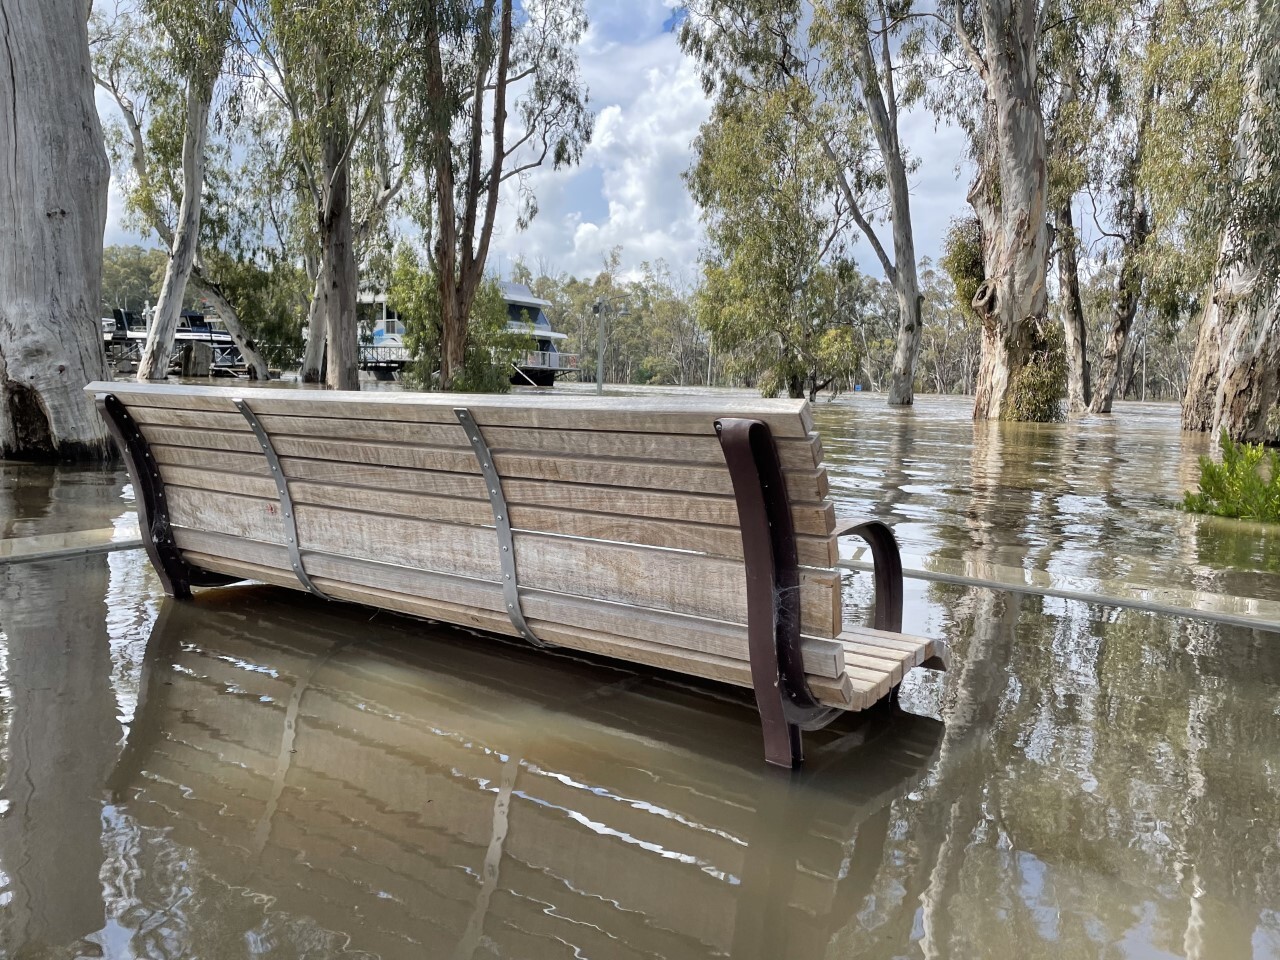 Floodwater rise to underneath a park bench in Echuca.